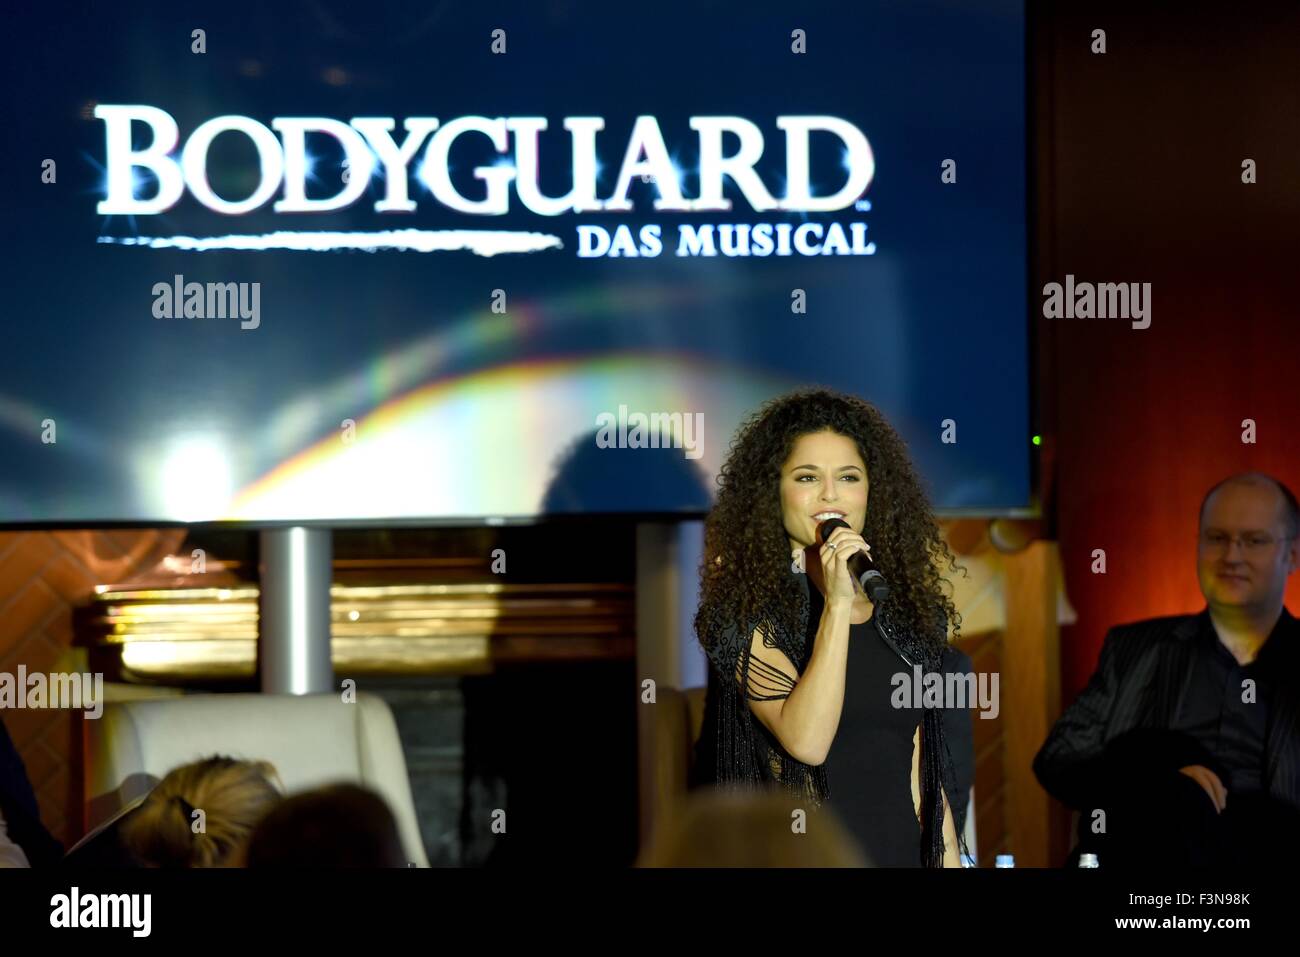 Cologne, Germany. 08th Oct, 2015. Singer Patricia Meeden performs during a press conference for the musical 'Bodyguard - The Musical' in Cologne, Germany, 08 October 2015. The musical will start its run at the Musical Dome in Cologne in November. Photo: Horst Galuschka/dpa - NO WIRE SERVICE -/dpa/Alamy Live News Stock Photo